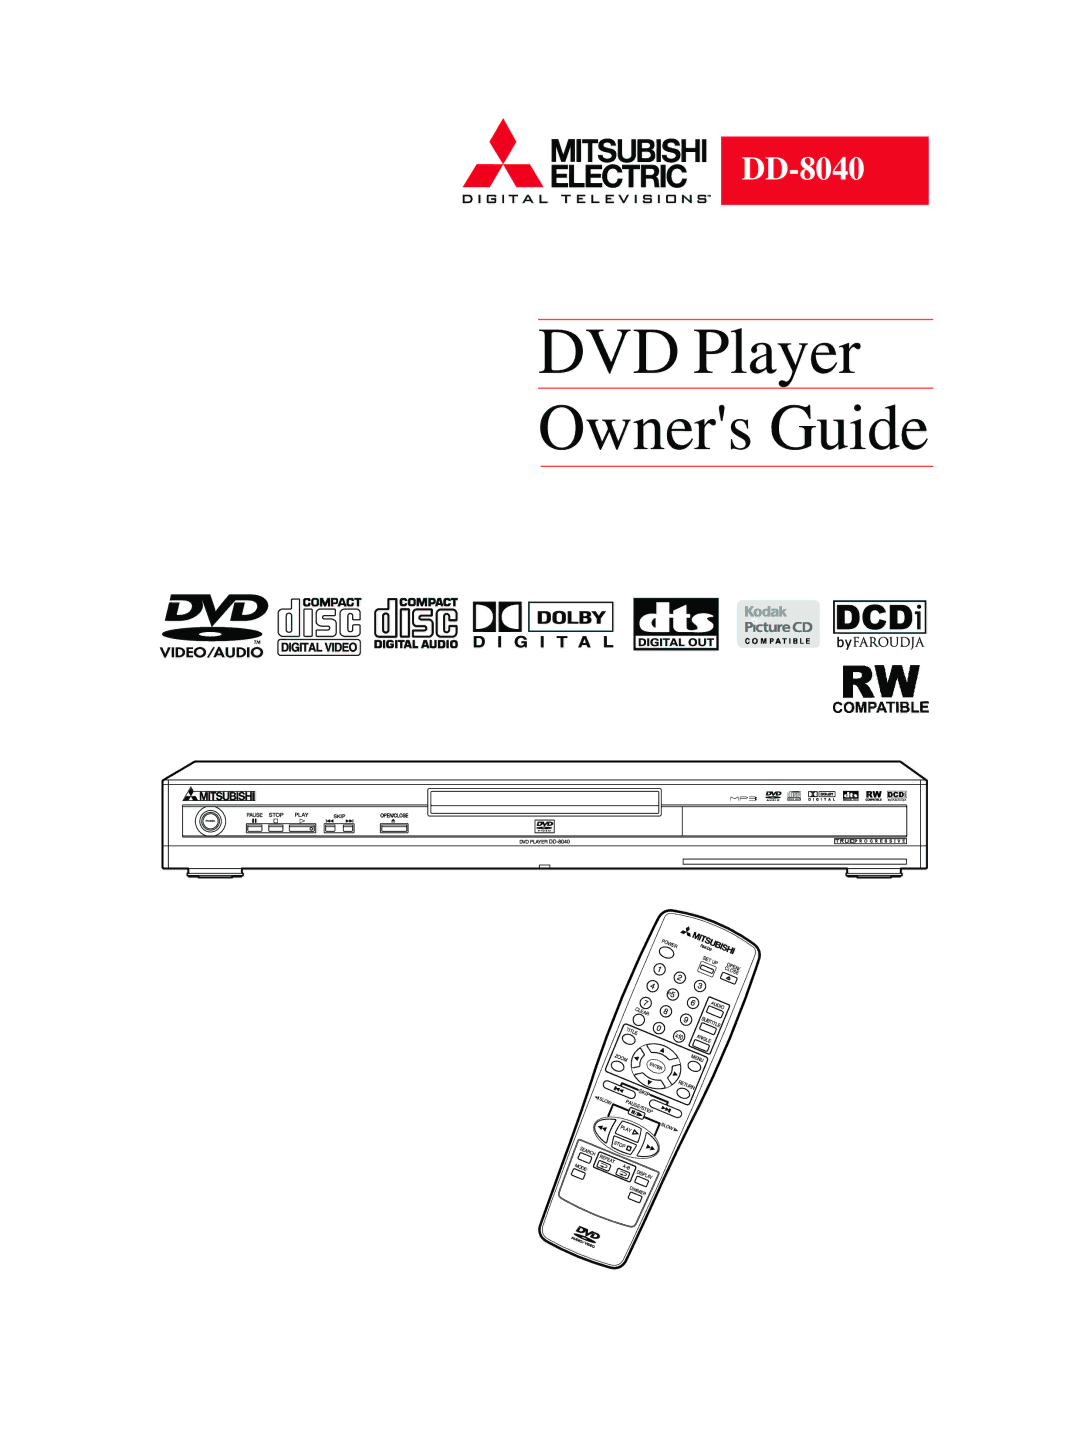 Mitsubishi Electronics DD-8040 manual DVD Player Owners Guide 